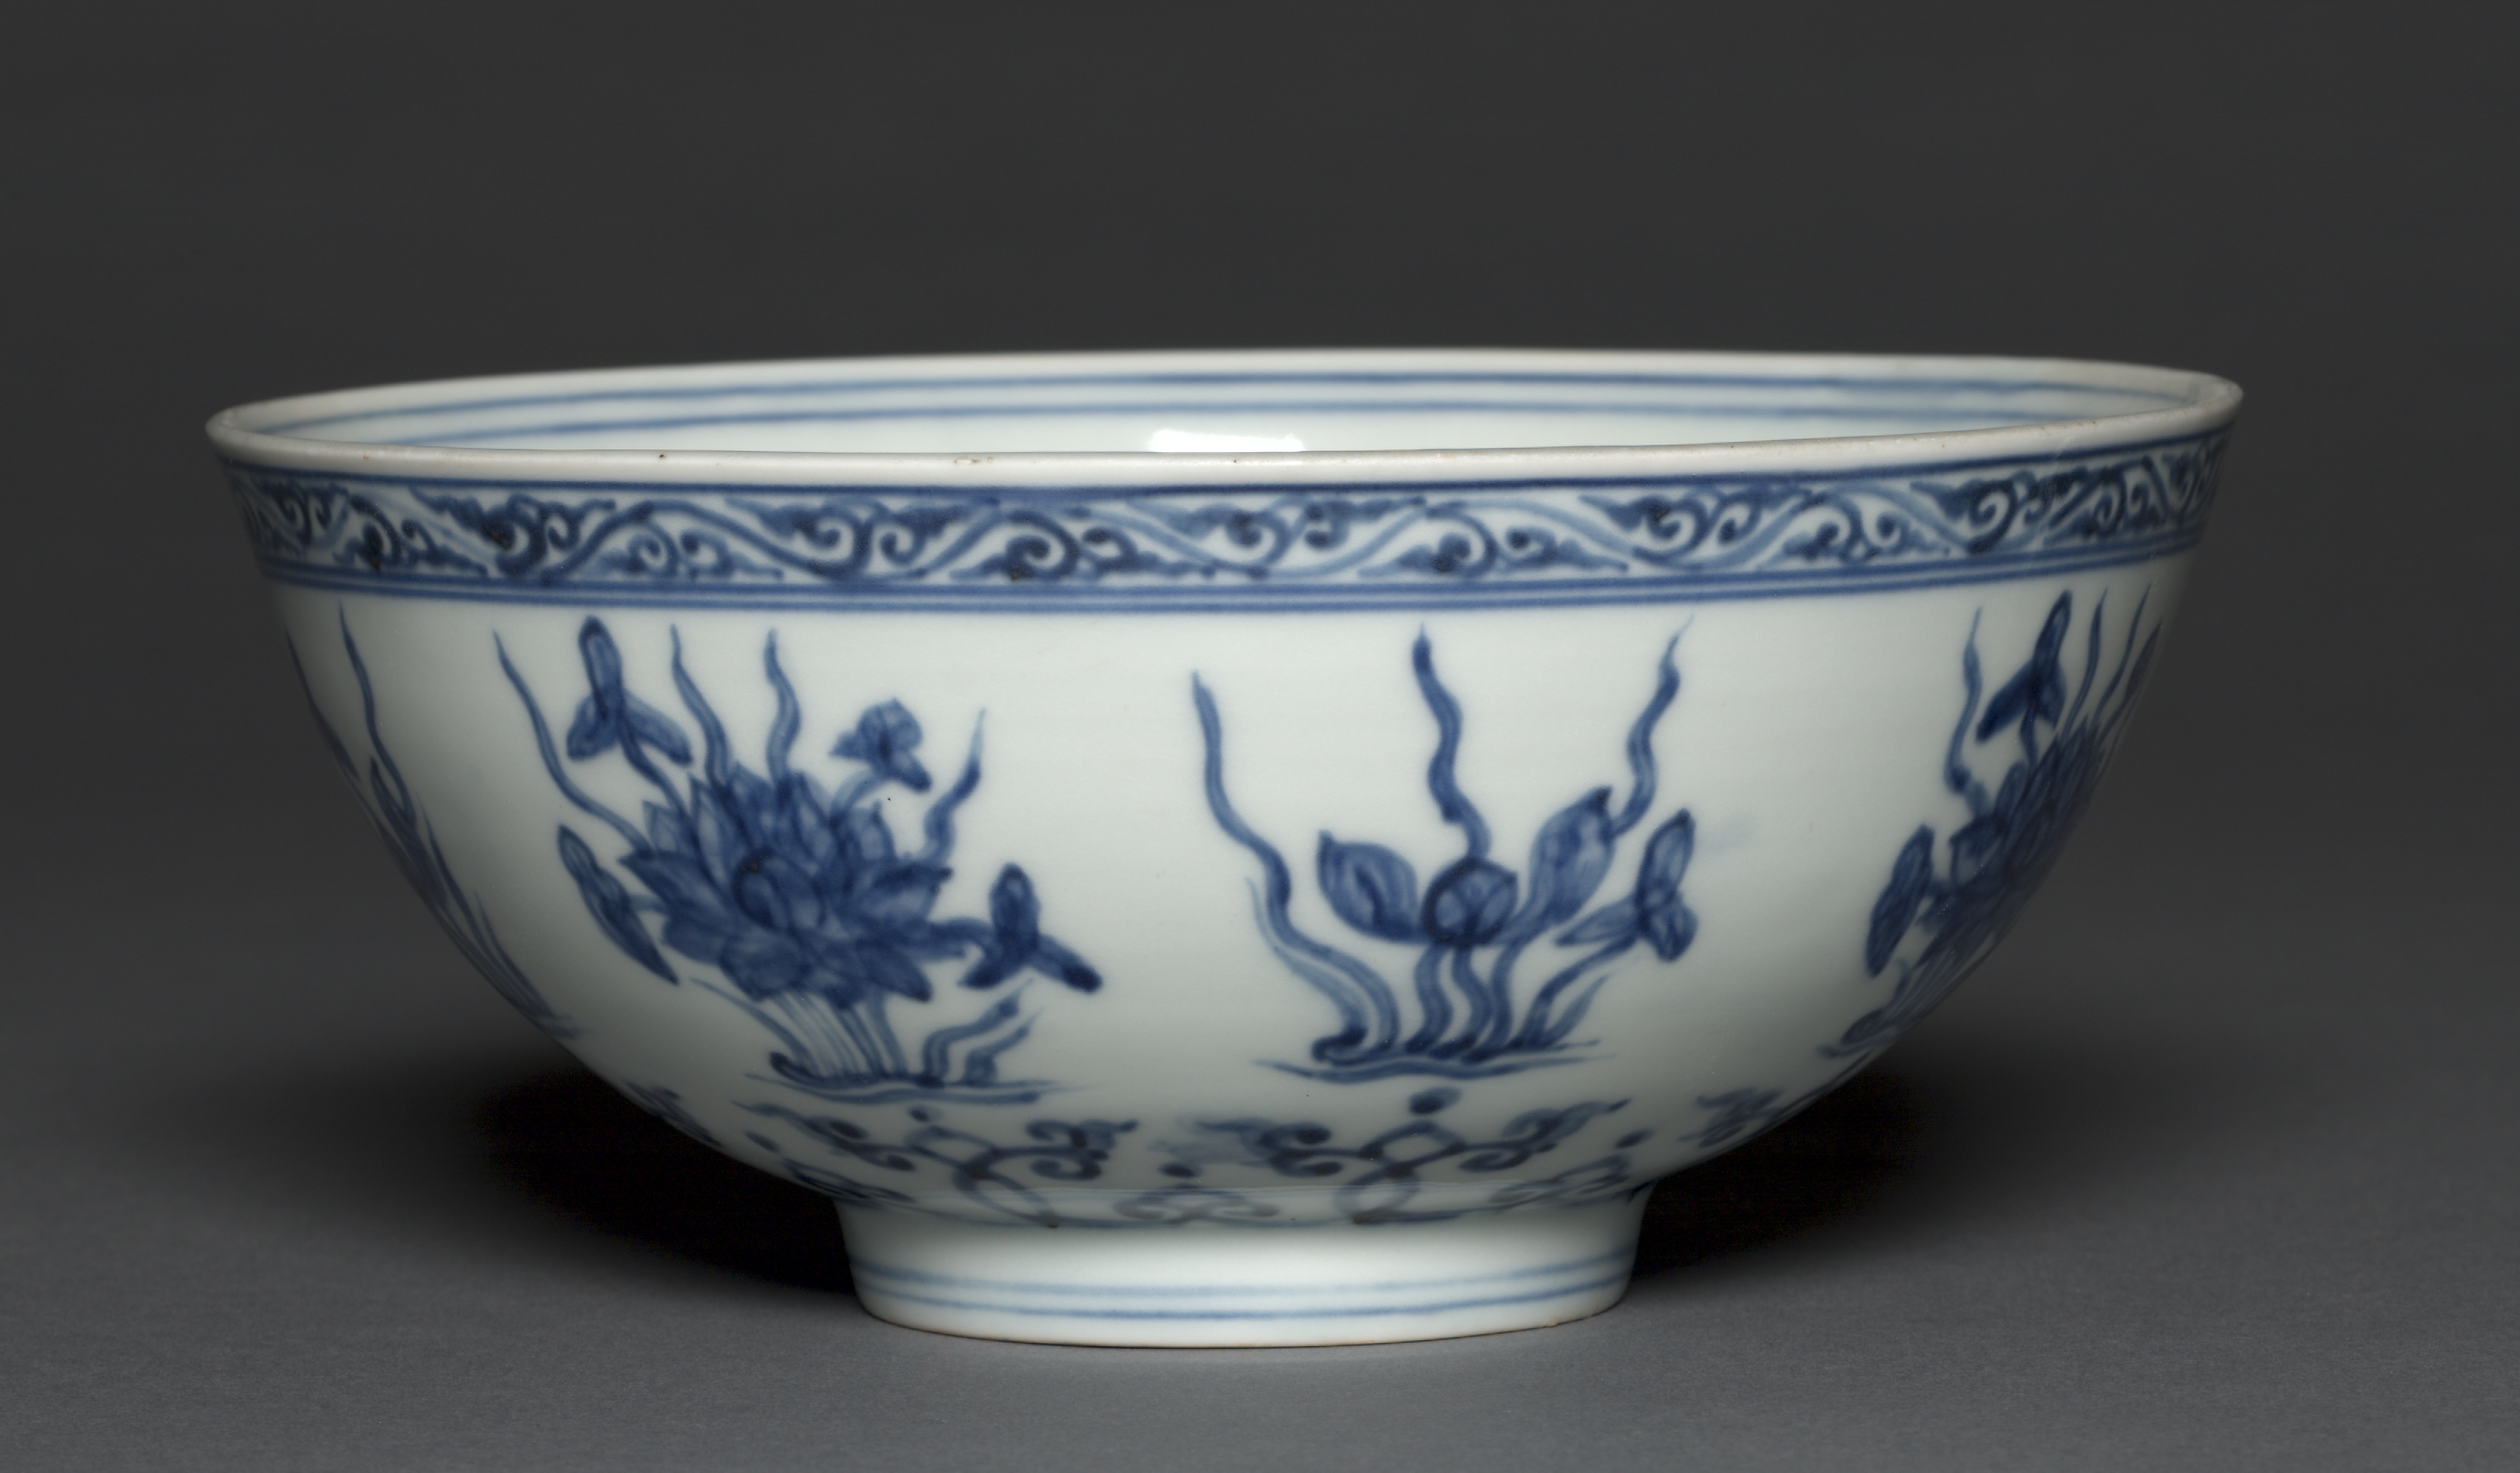 Bowl (wan) with Water Plants and Arabesques